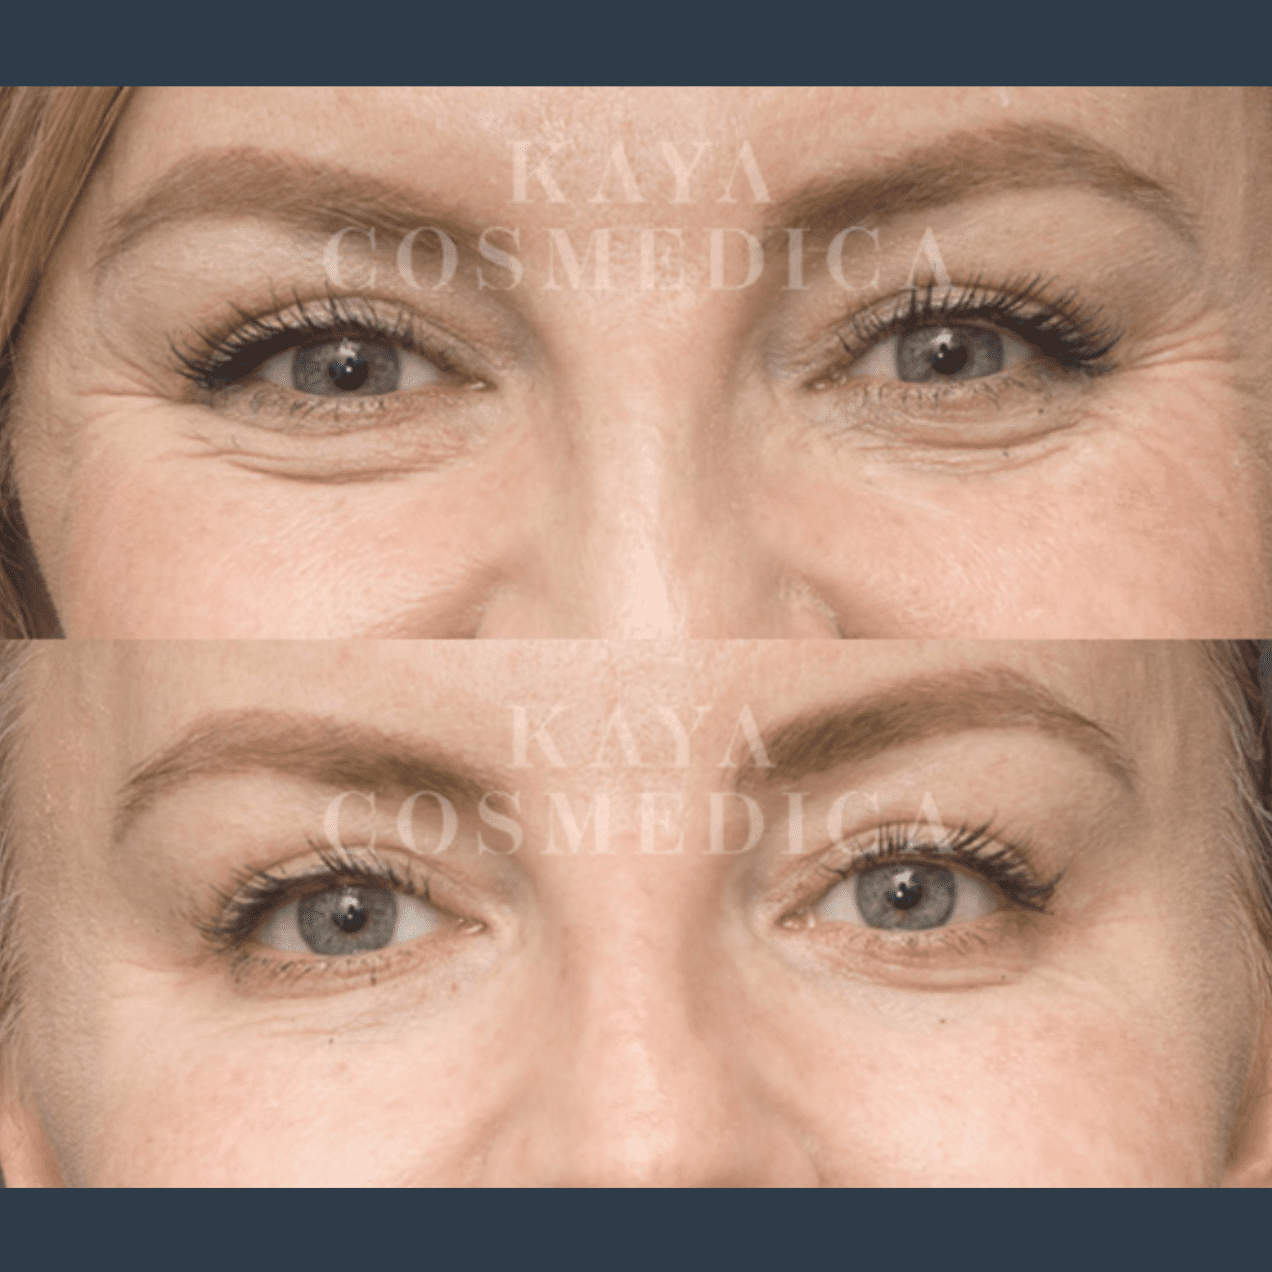 Close-up comparison of a woman's eyes before and after anti-wrinkle treatment, showcasing differences in skin texture and eye appearance, with the logo "kaya cosmedica" at the center.